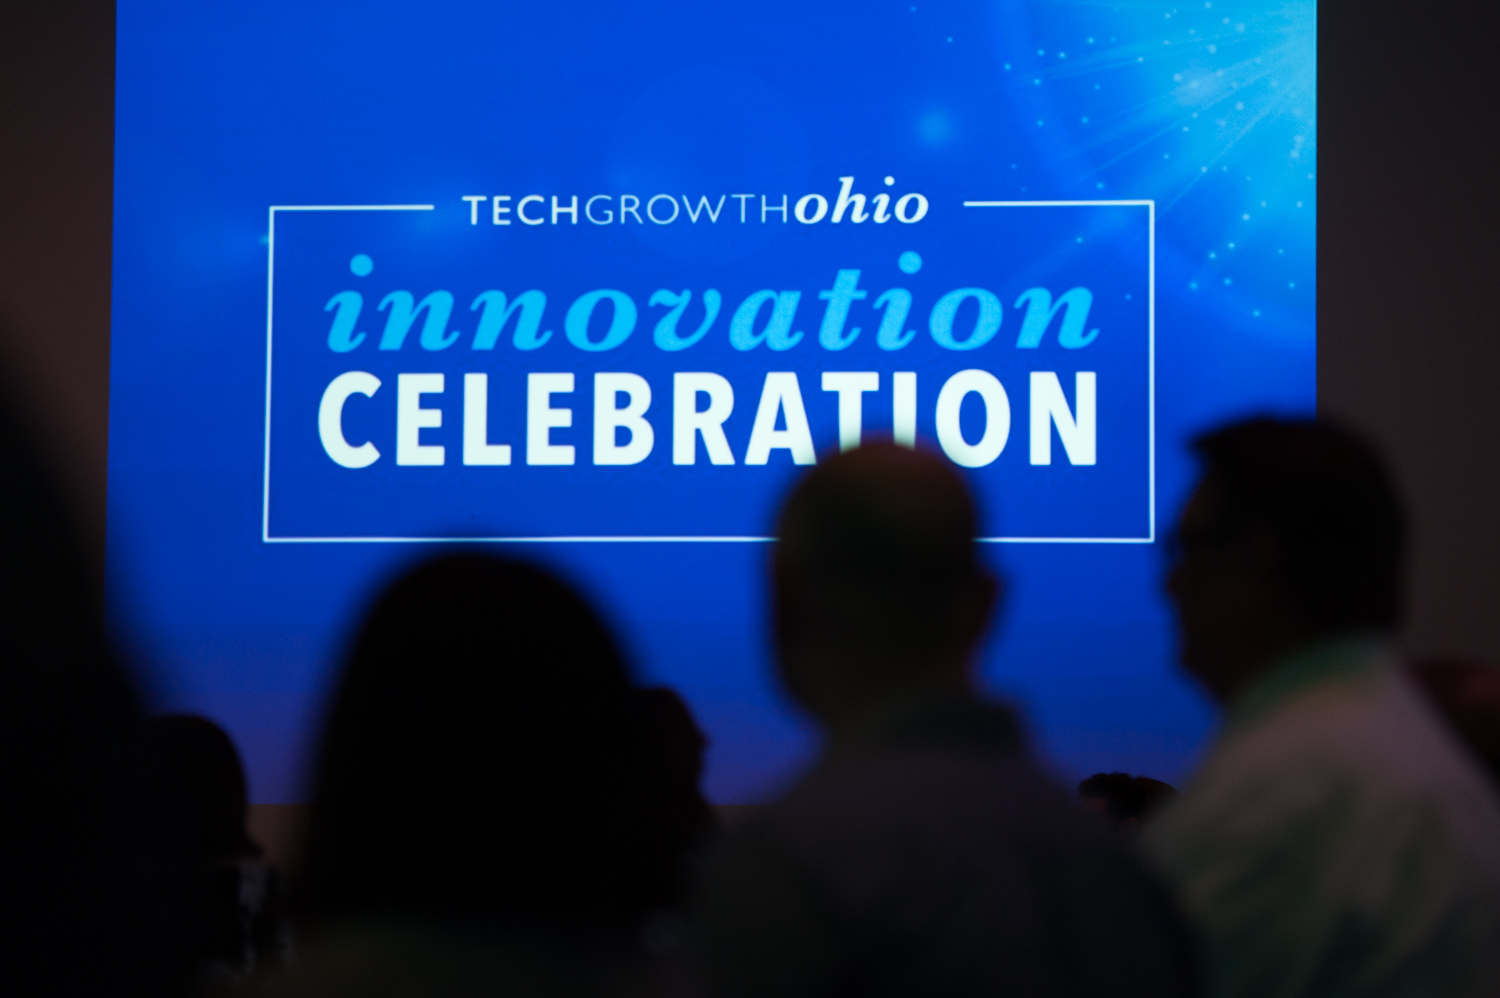 Event coverage for TechGROWTH Ohio's Innovation Celebration.